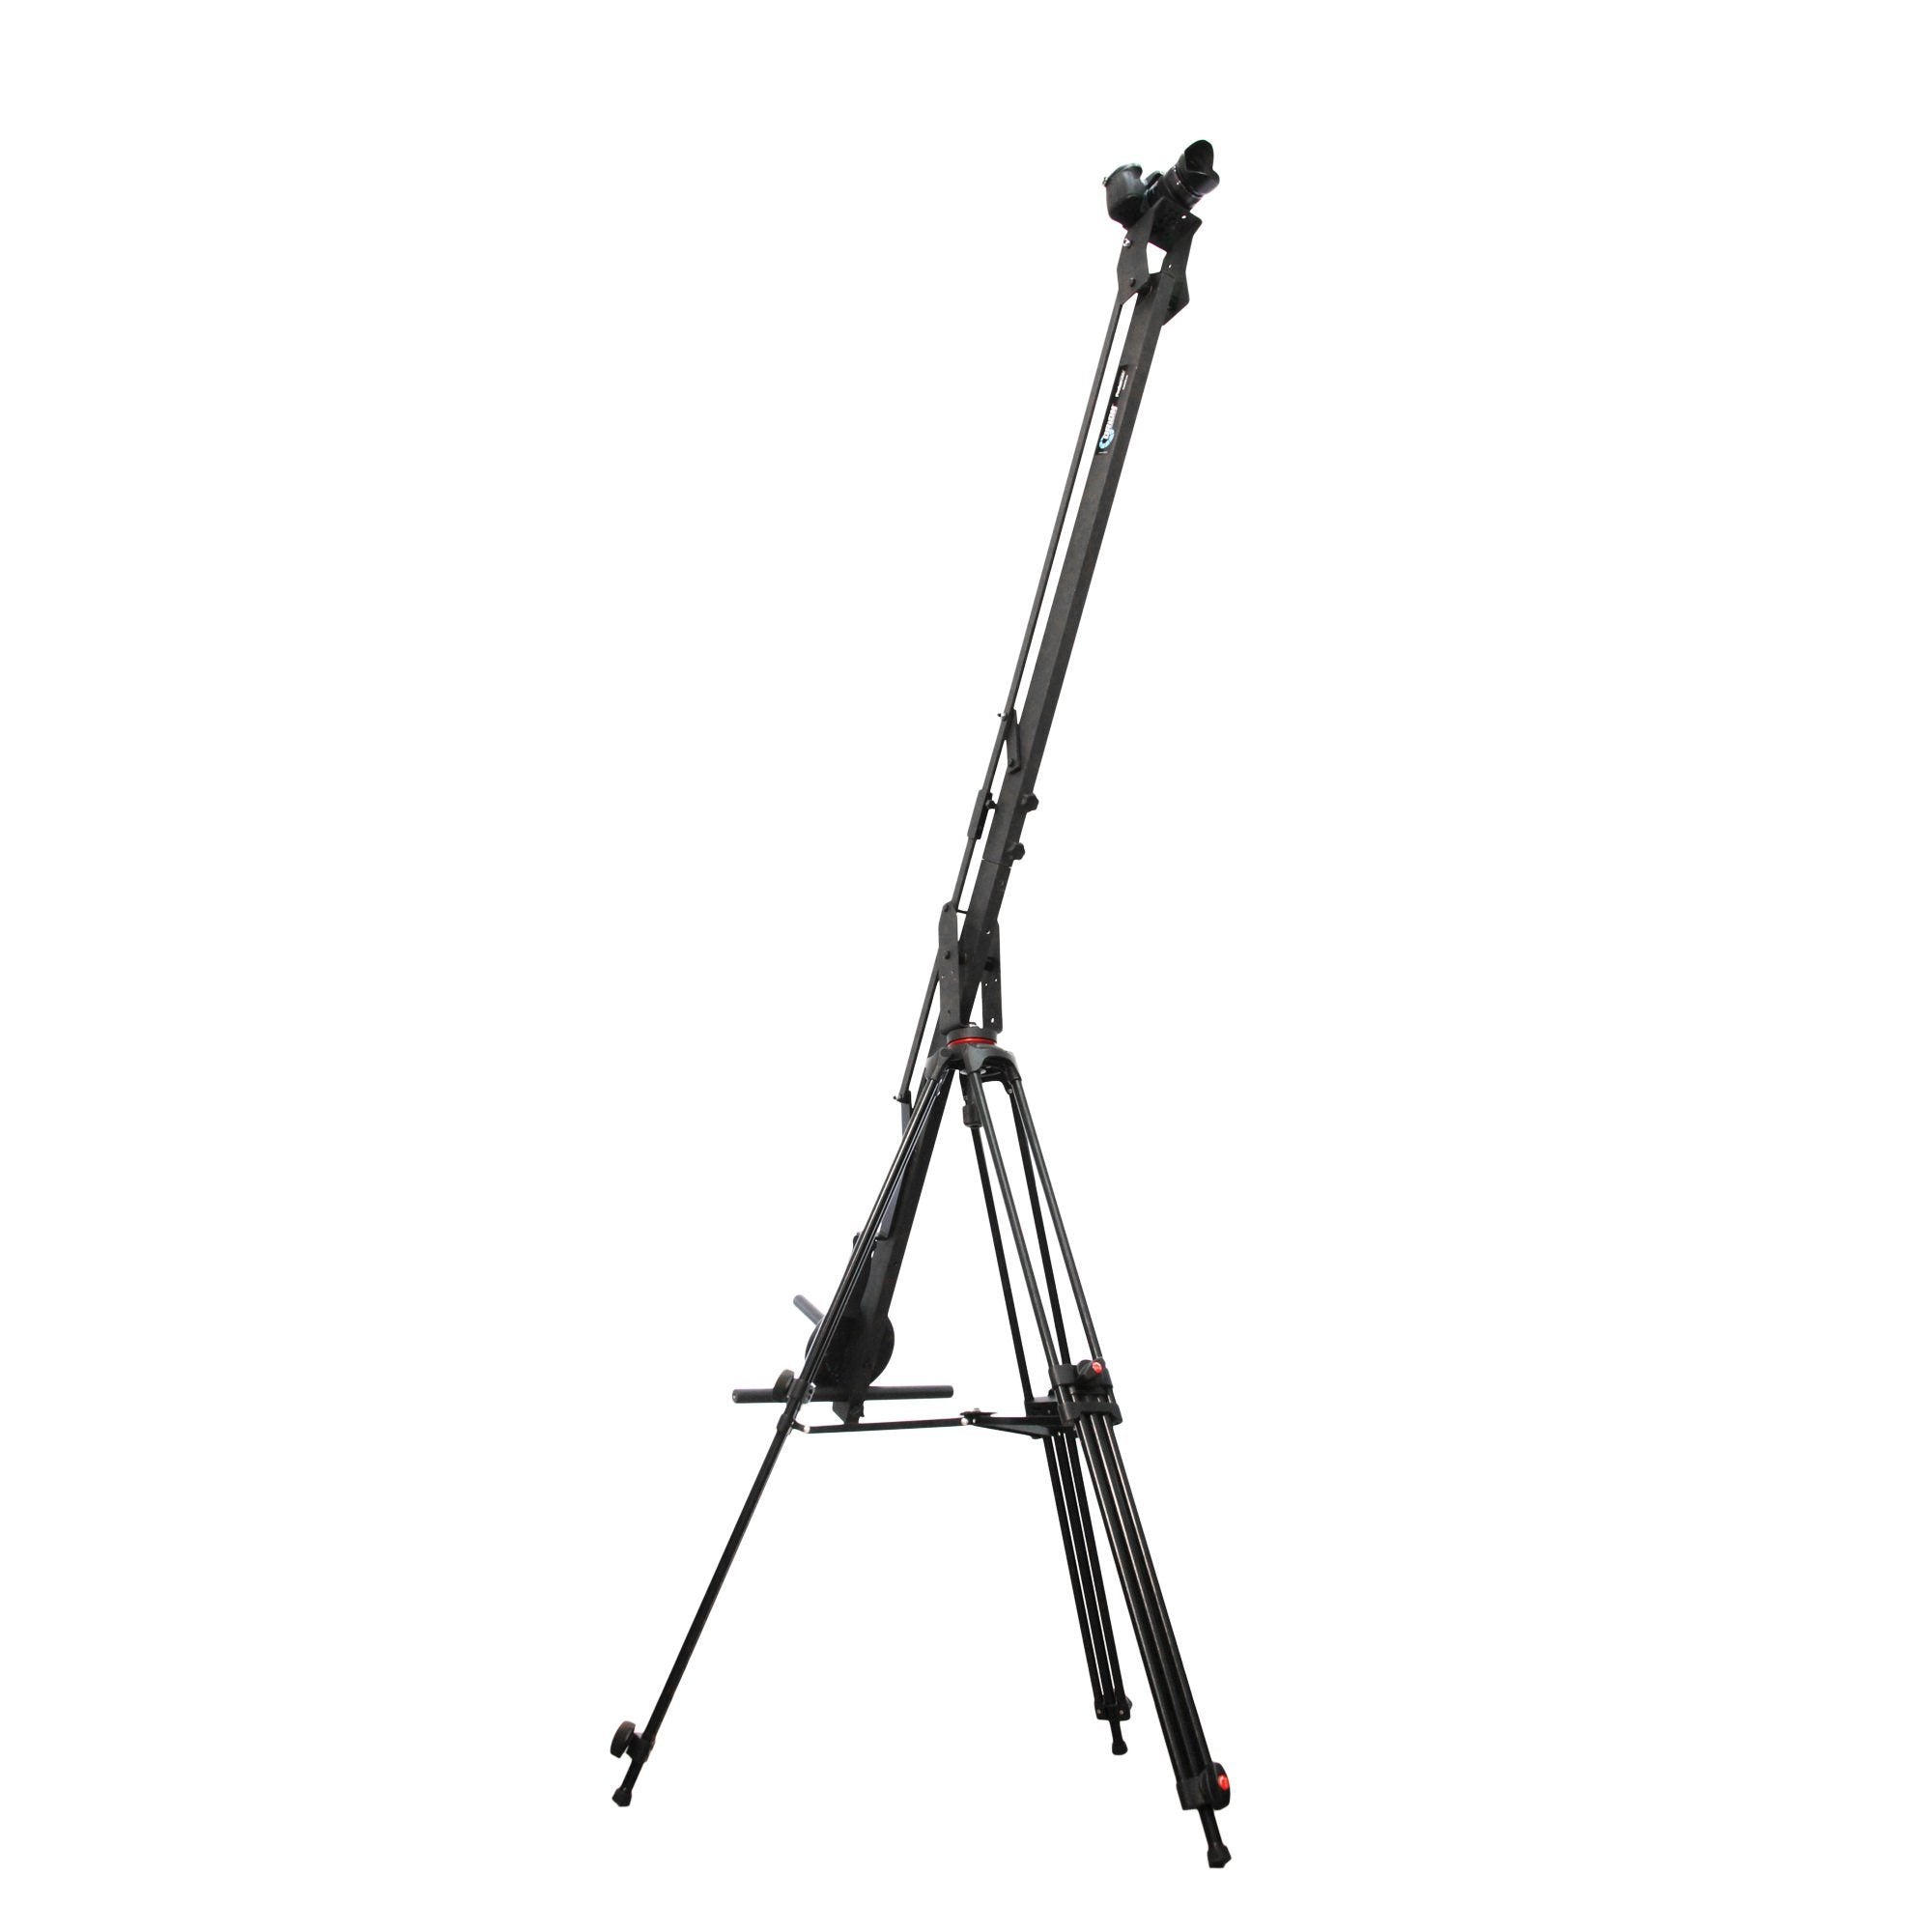 Orion DVC210 Camera Jib Crane with 4 ft Extension (12 ft Total Length)